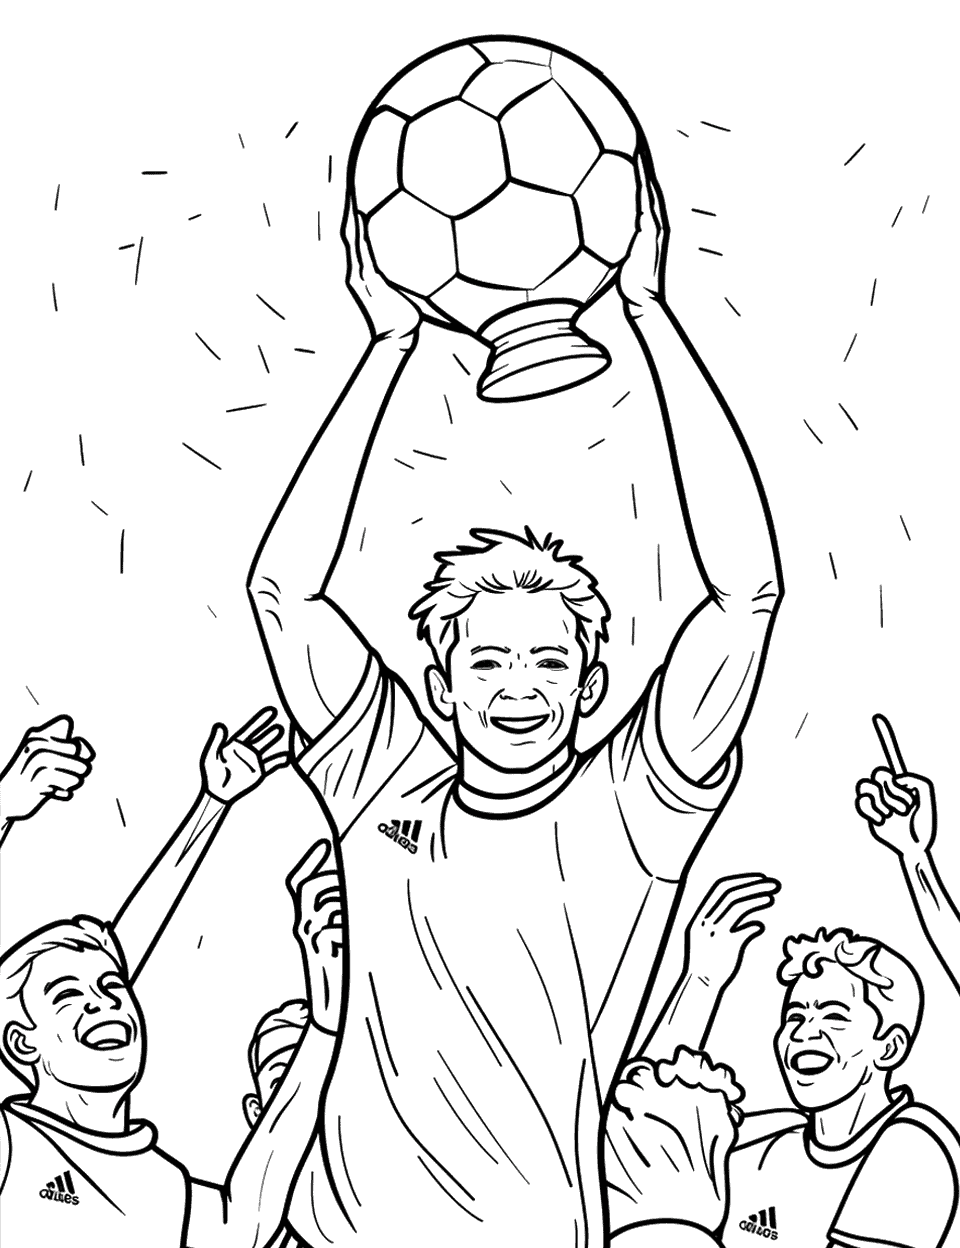 World Cup Celebration Soccer Coloring Page - A soccer player holding the World Cup trophy above his head with teammates cheering around him.